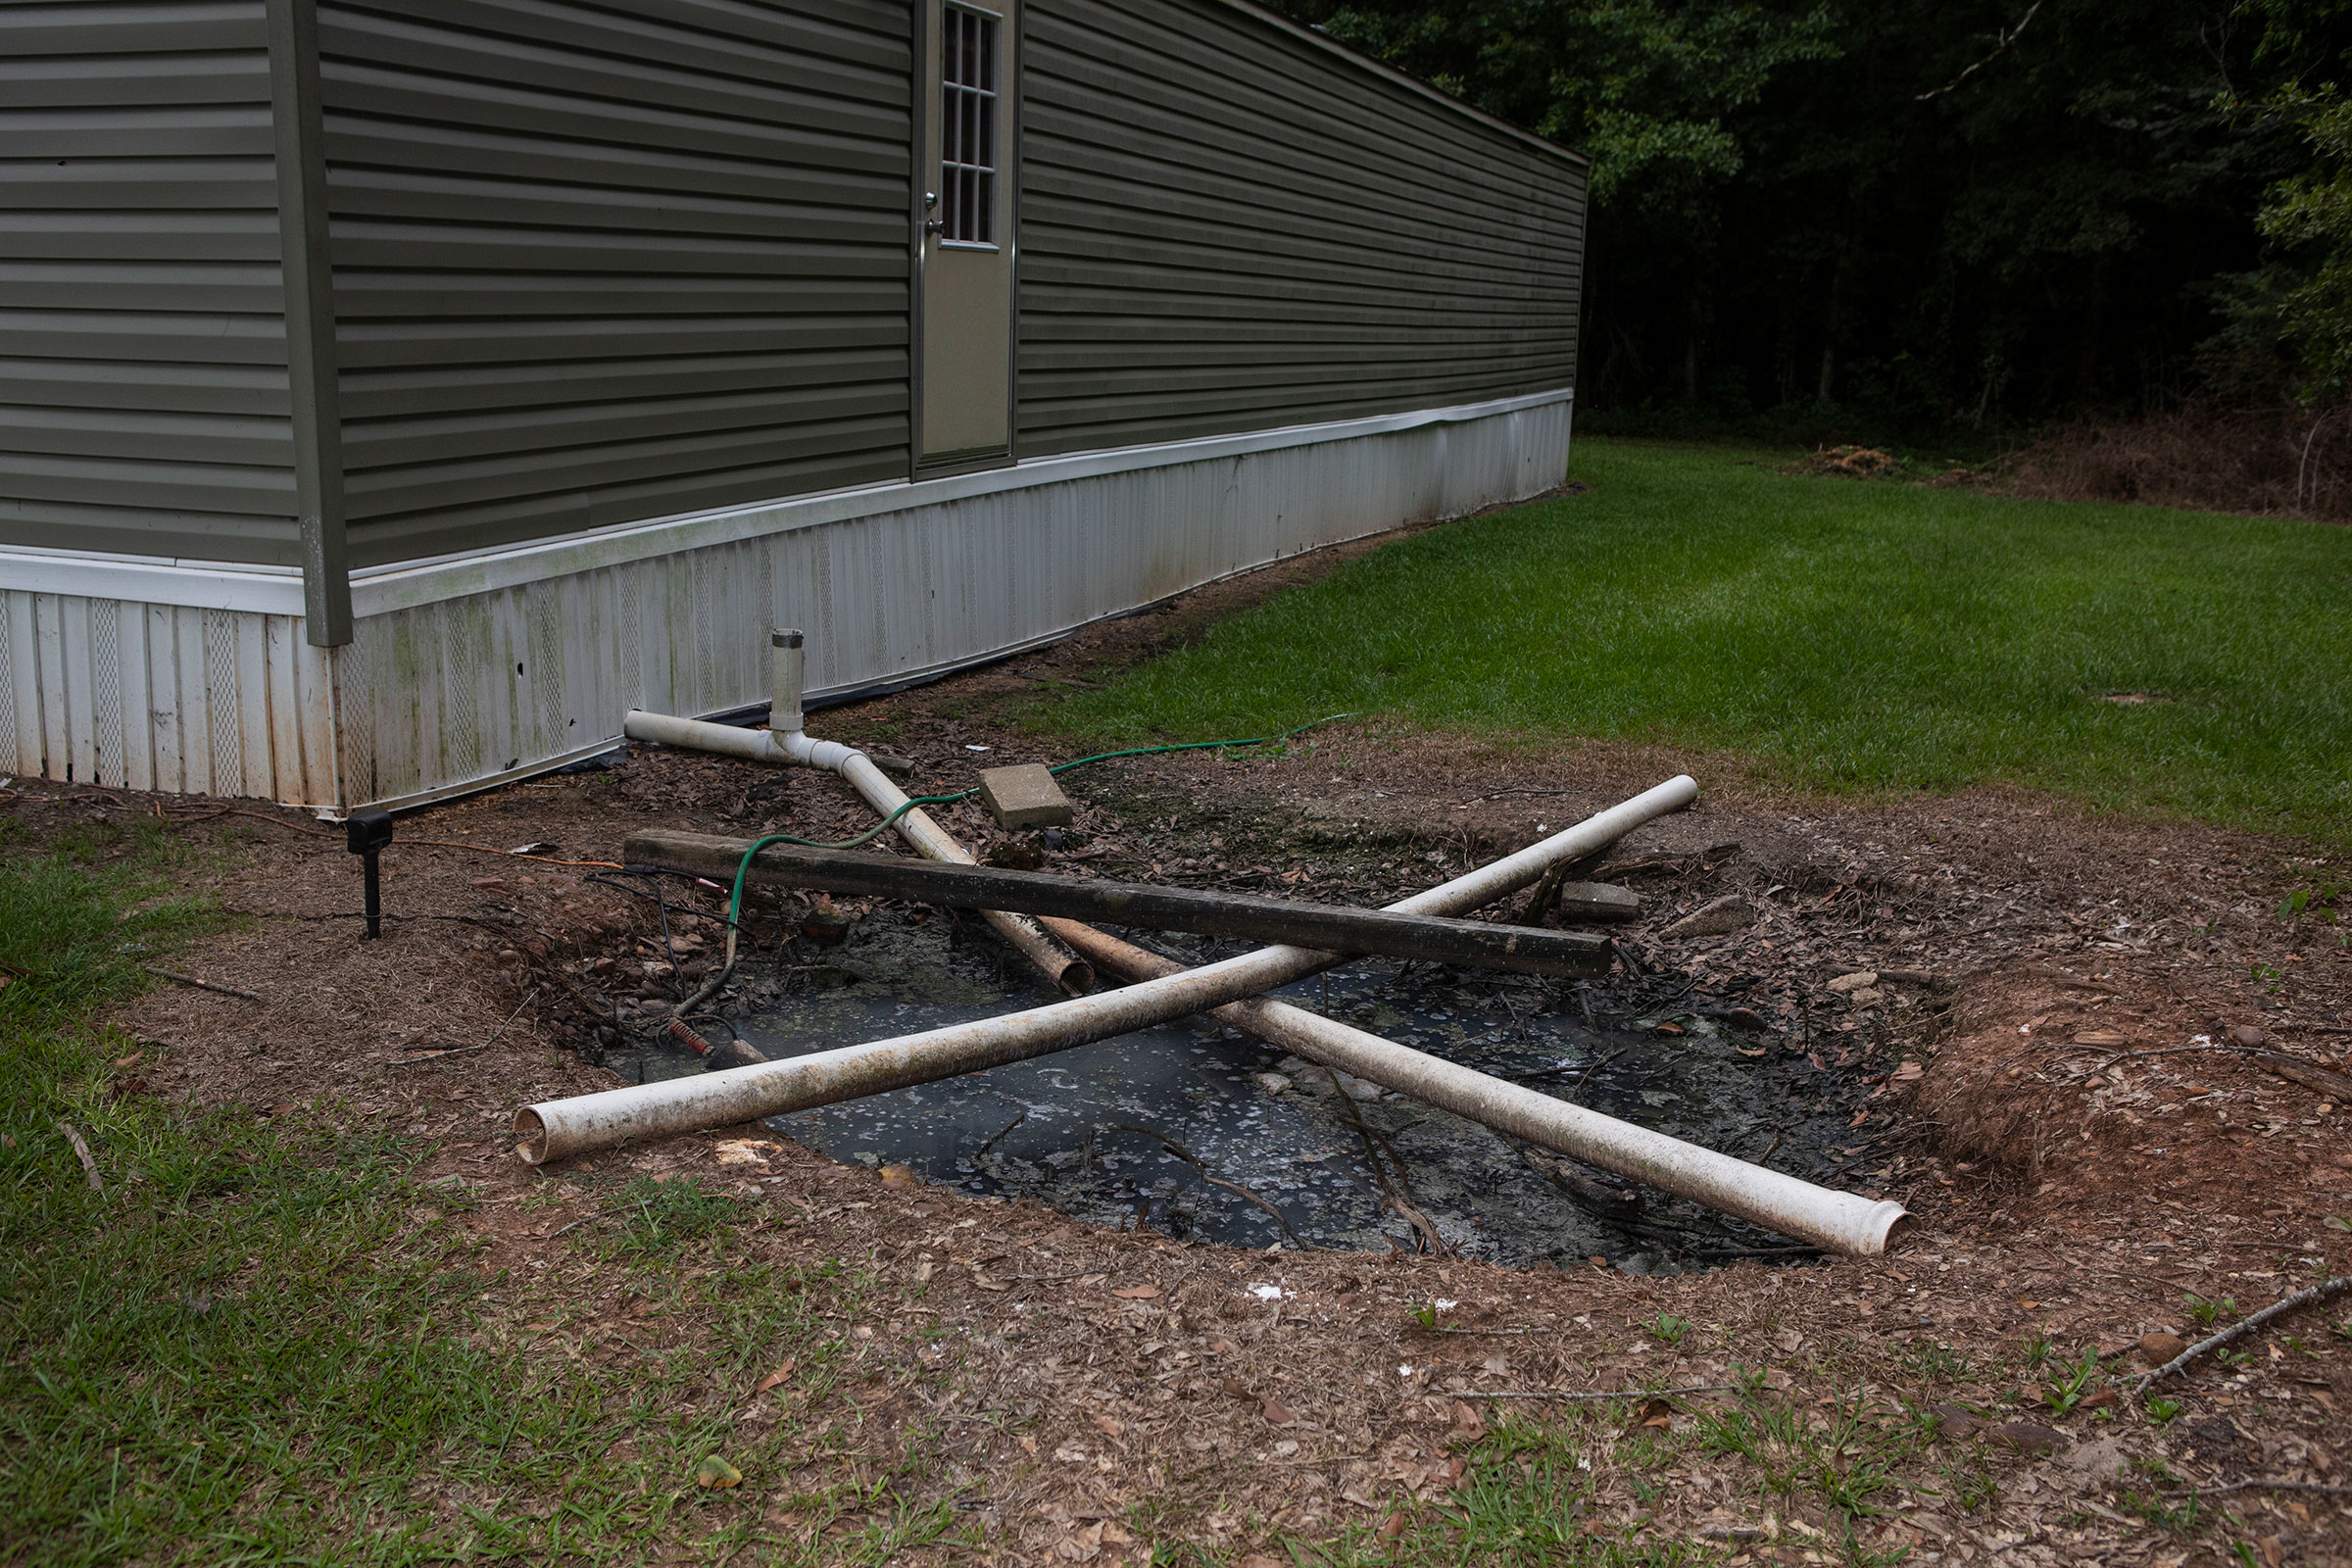 A straight pipe sewage solution in the backyard of a resident of Lowndes County, Alabama on August 1st, 2022.